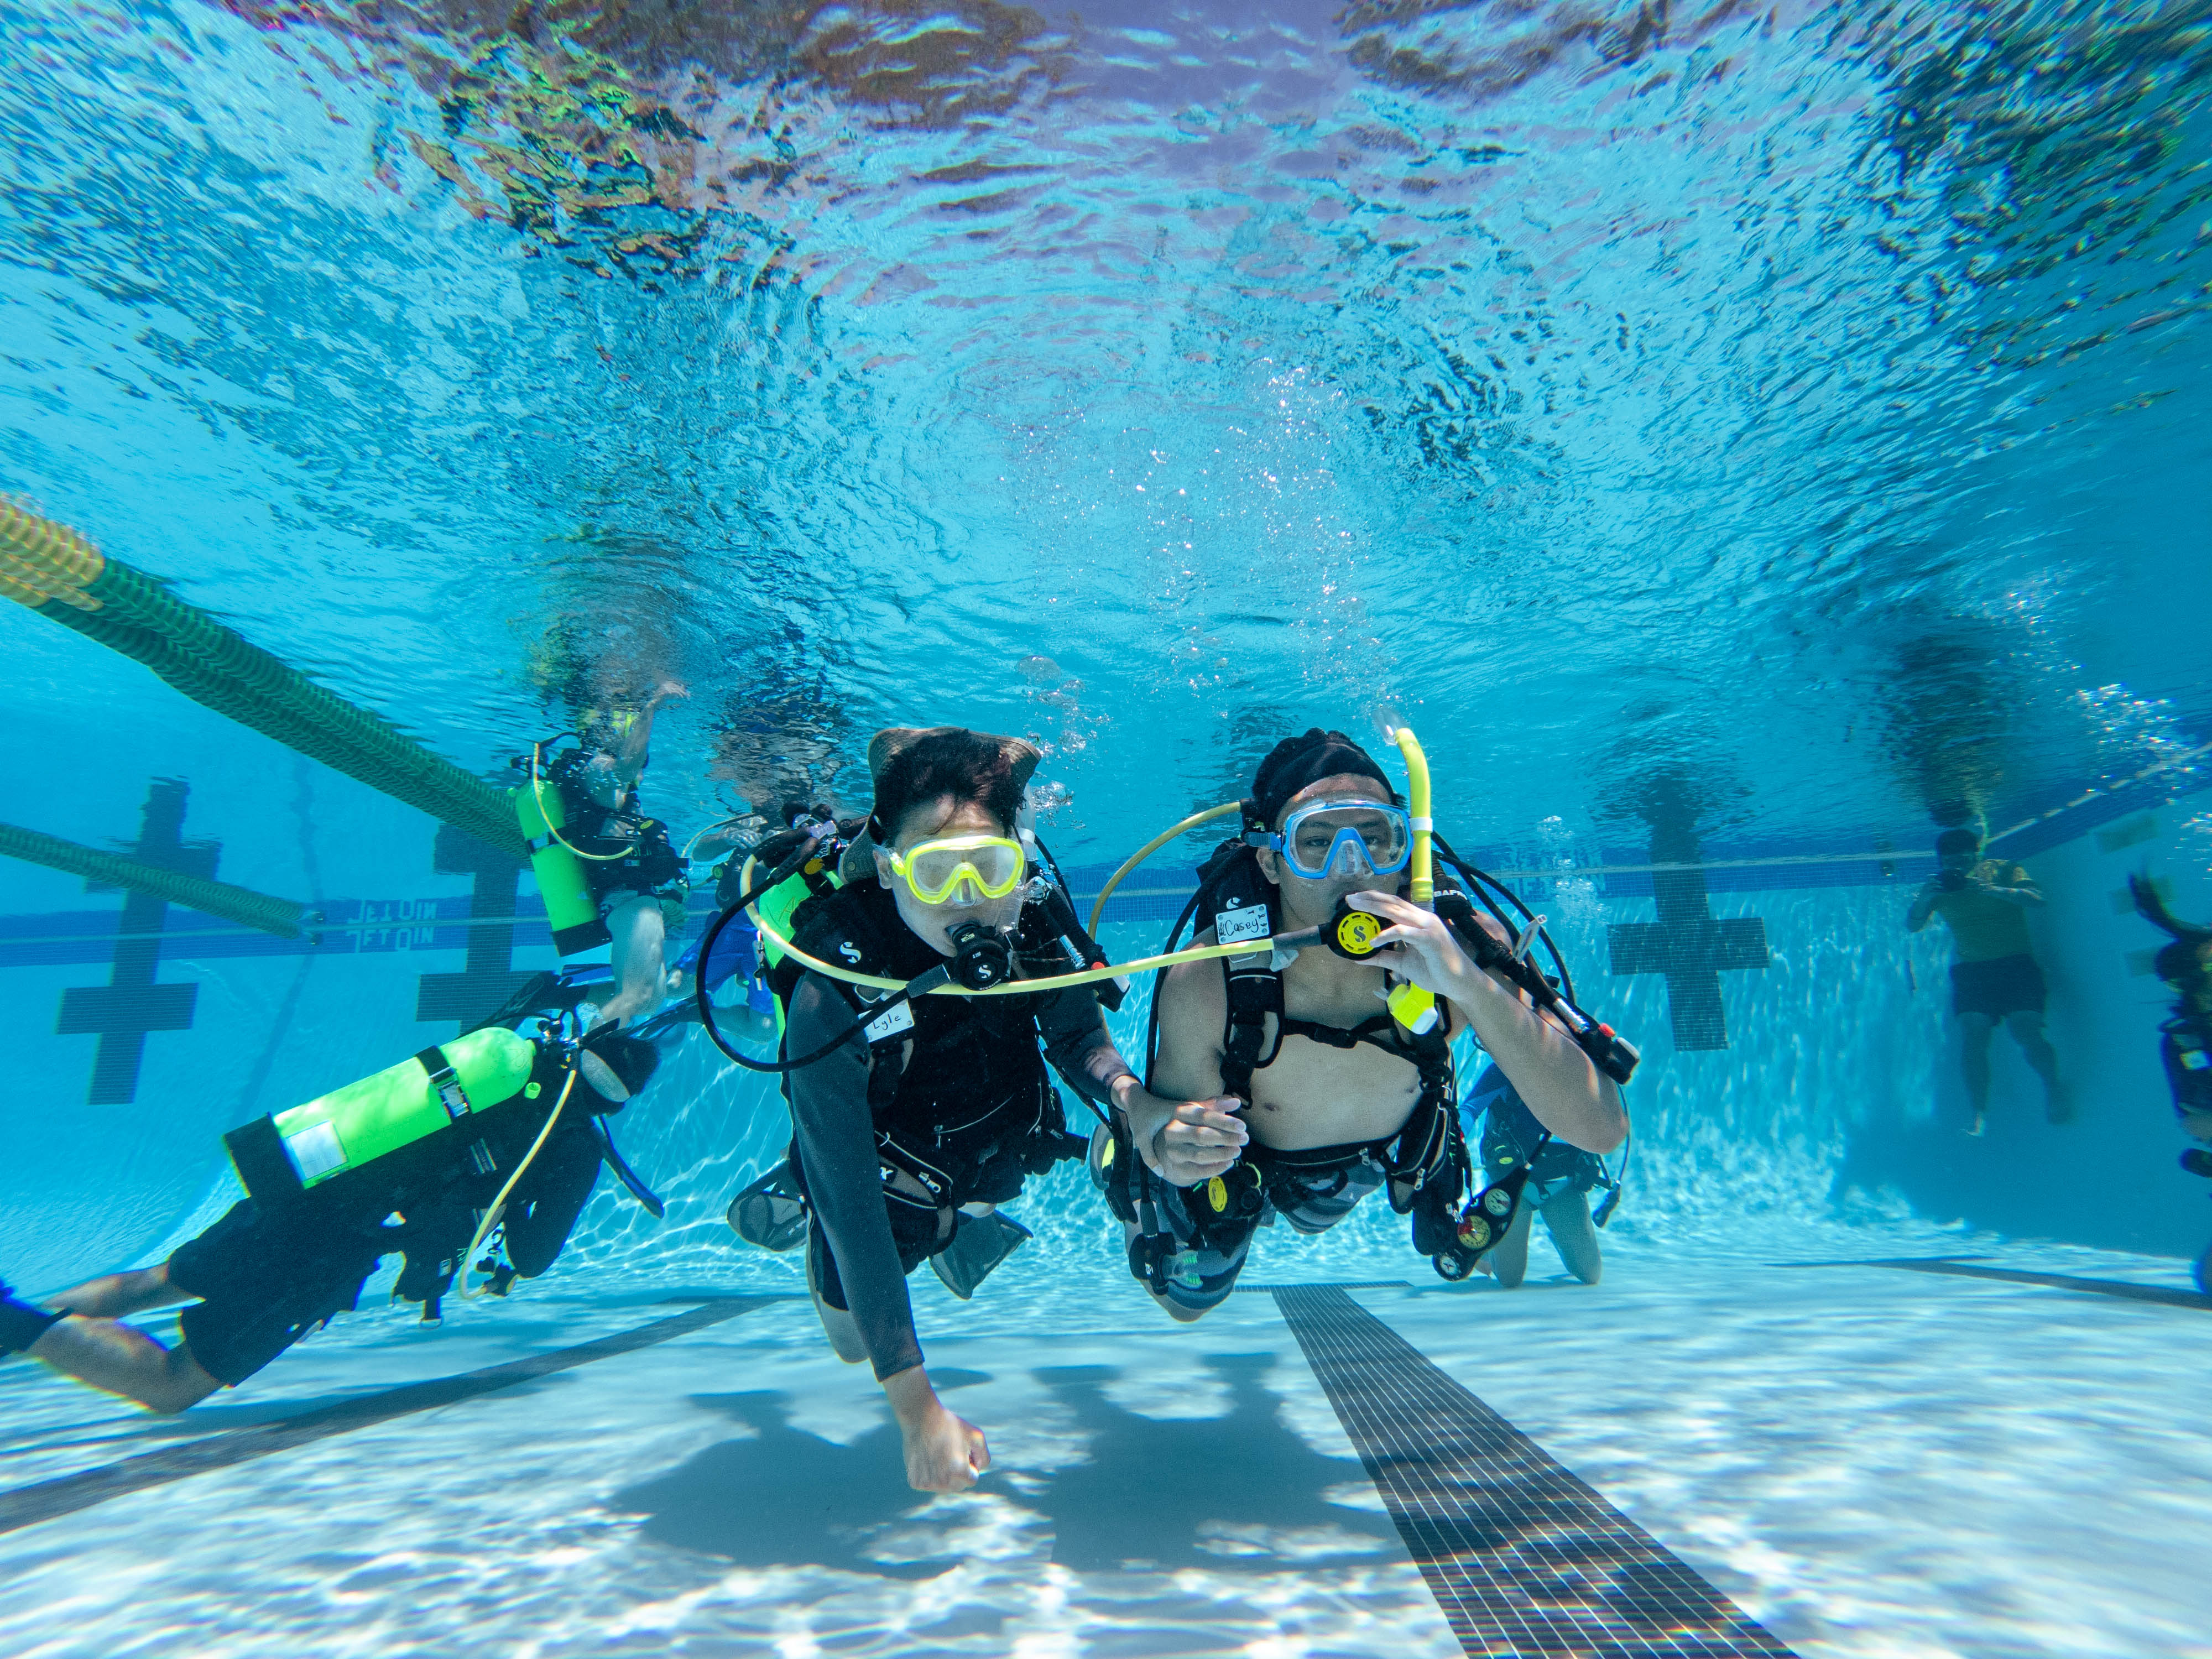 Two scuba divers with masks and snorkels are underwater in a clear pool, with other divers and swimming pool lanes visible in the background.